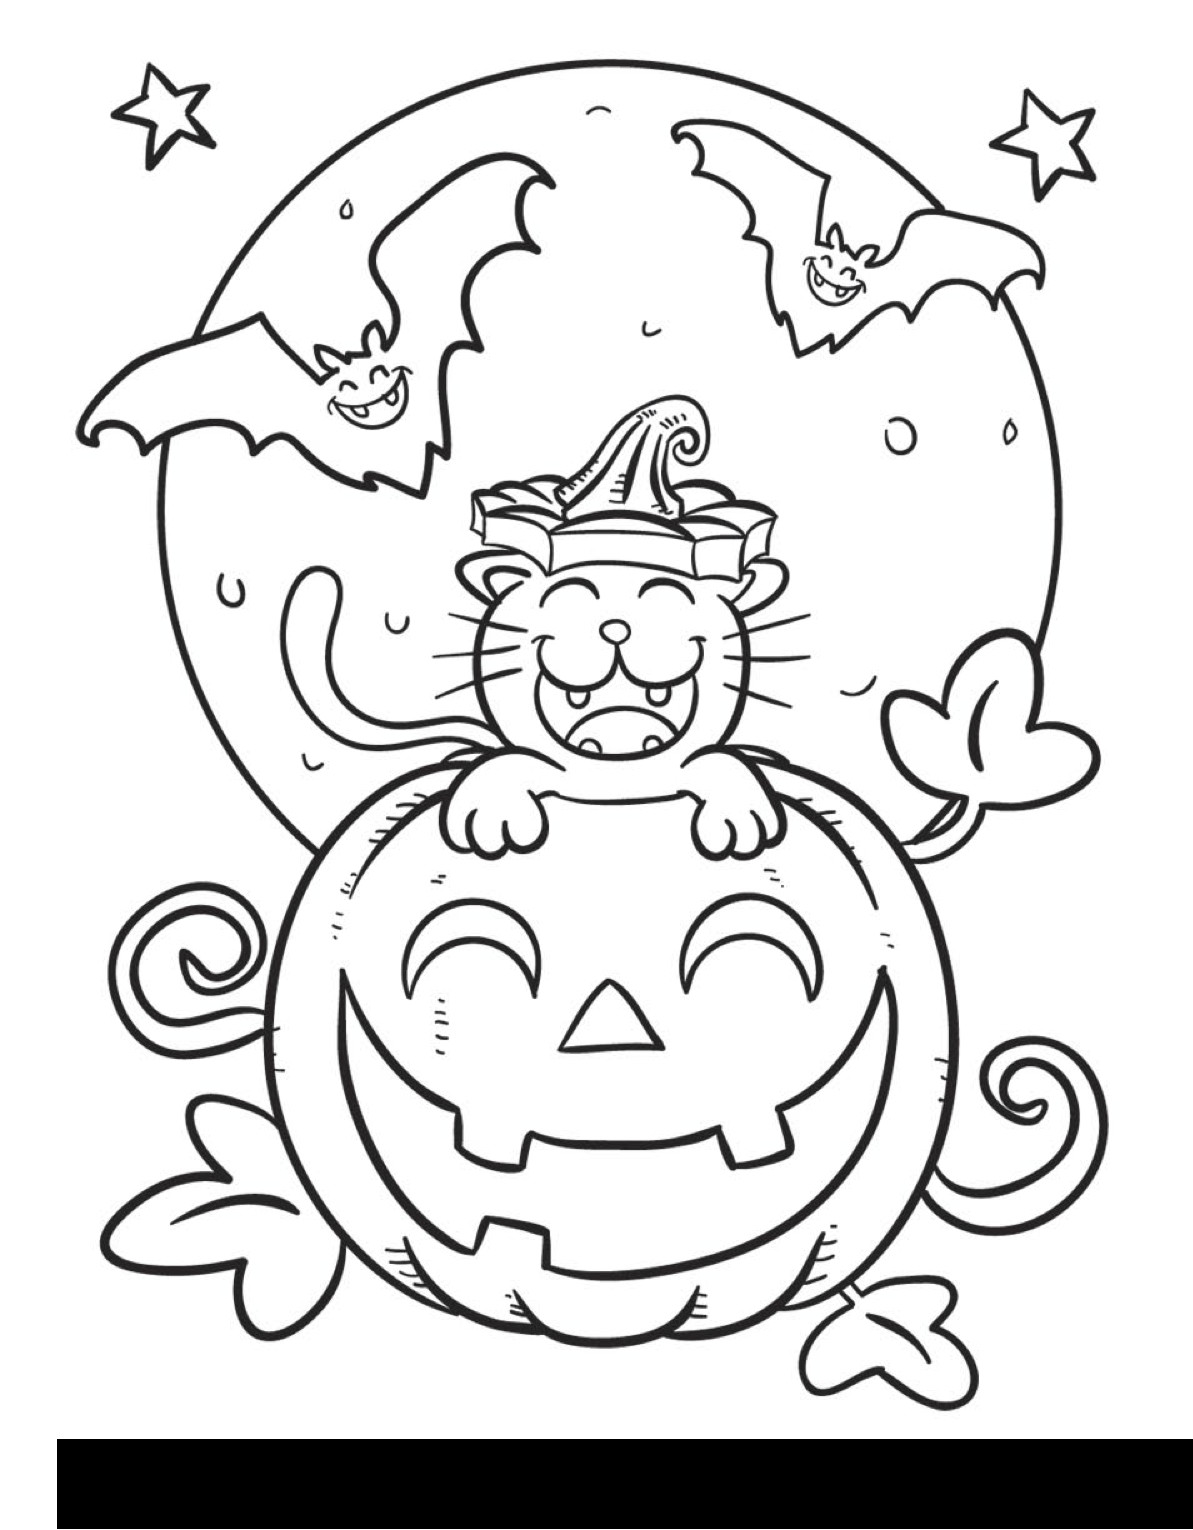 The 21 Best Ideas for Free Halloween Coloring Pages for Kids – Home ...